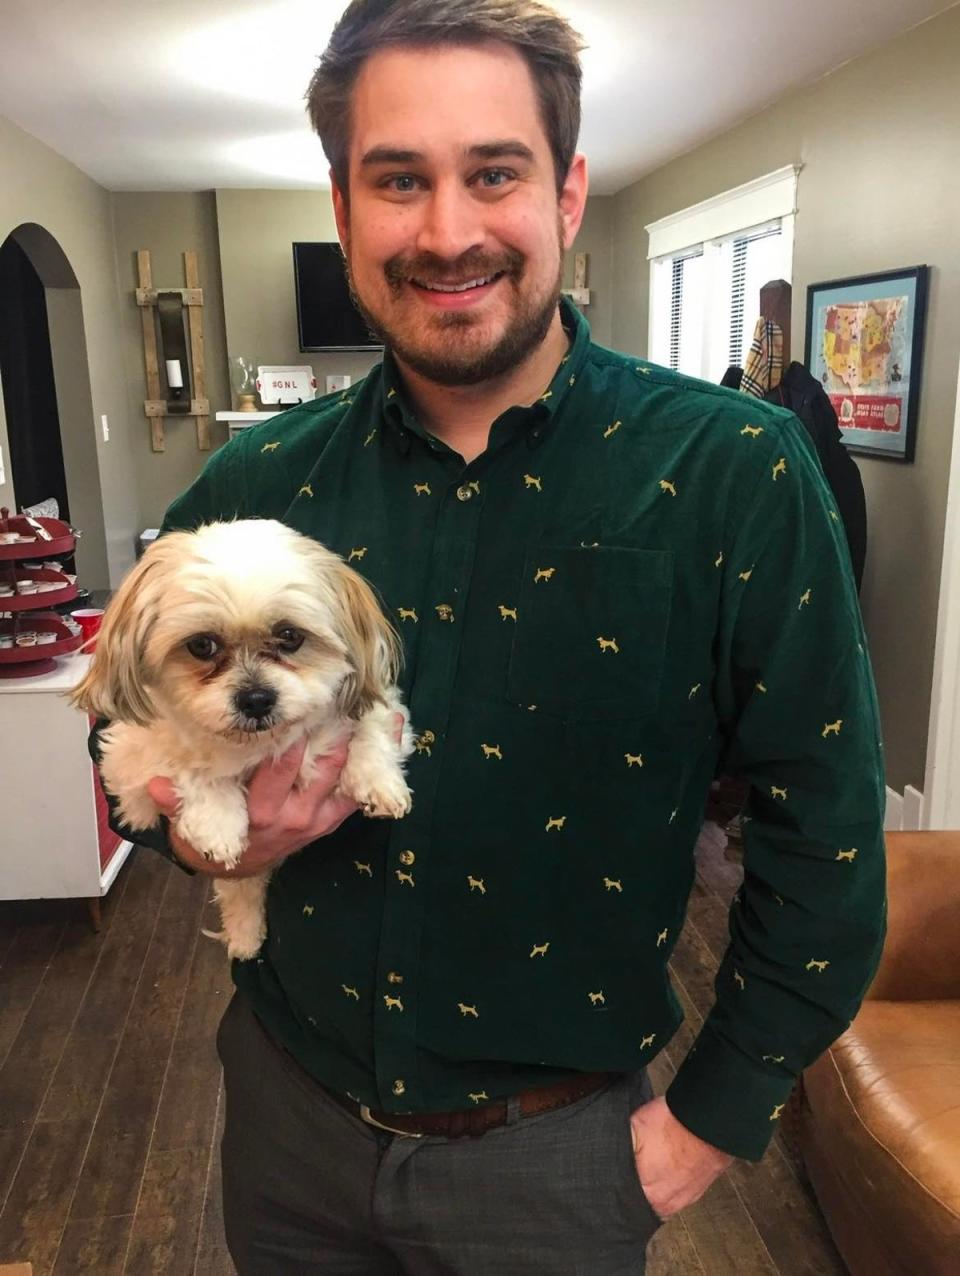 Tim Shrum, with Maltese Shih Tzu Tryp, says he feels bereft after the adored pet was caught up in his divorce (Courtesy of Tim Shrum)